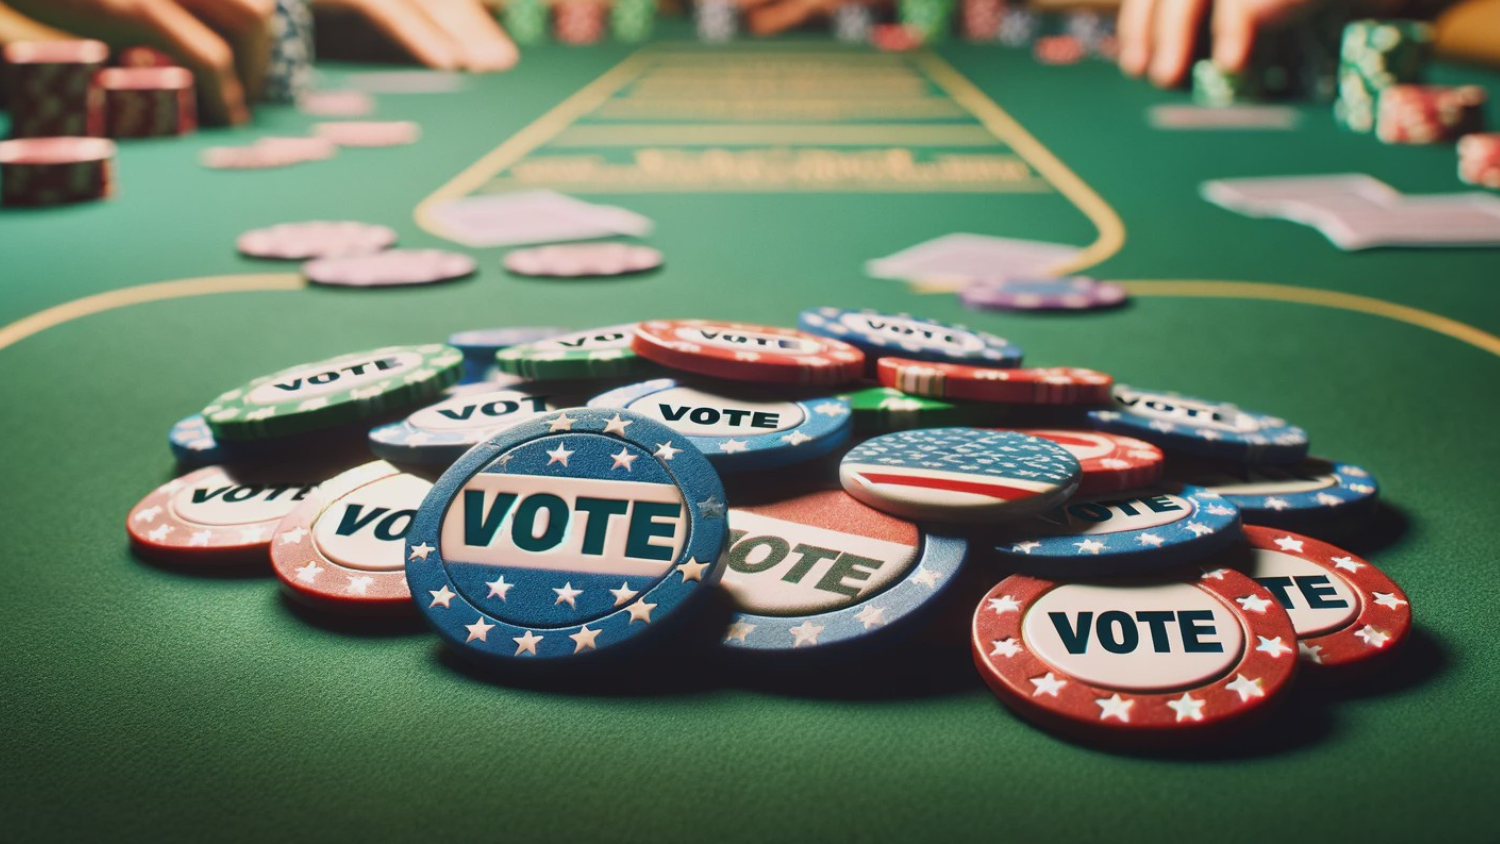 Are Election Futures Contracts Gaming? Federal Court Weighs In